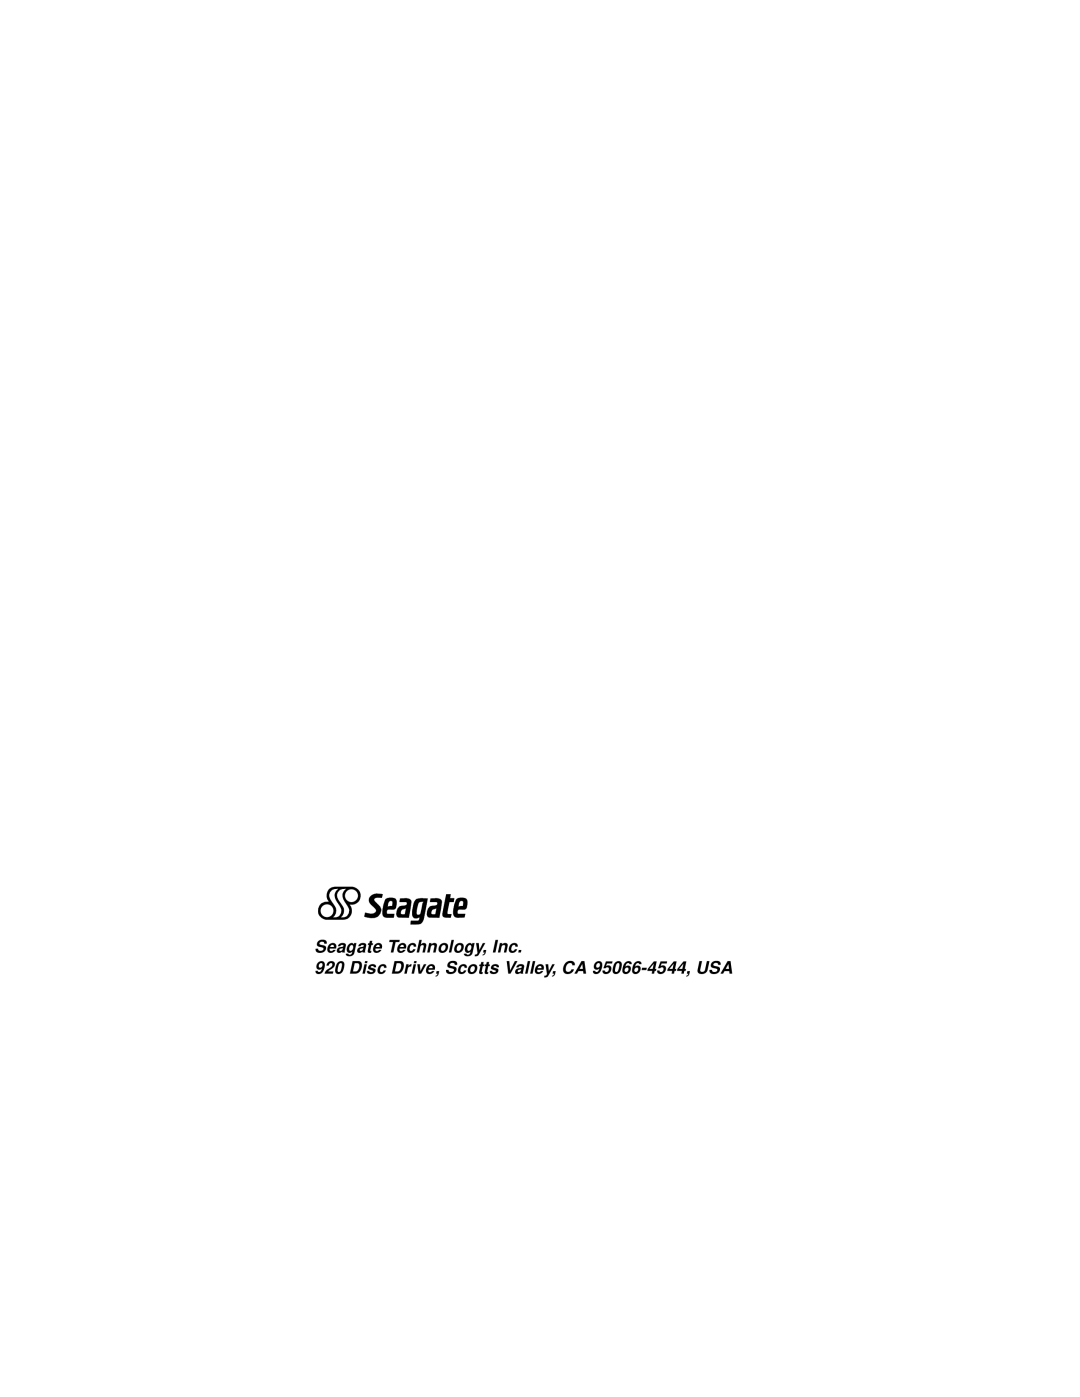 Seagate ST446452W manual Seagate Technology, Inc, Disc Drive, Scotts Valley, CA 95066-4544, USA 